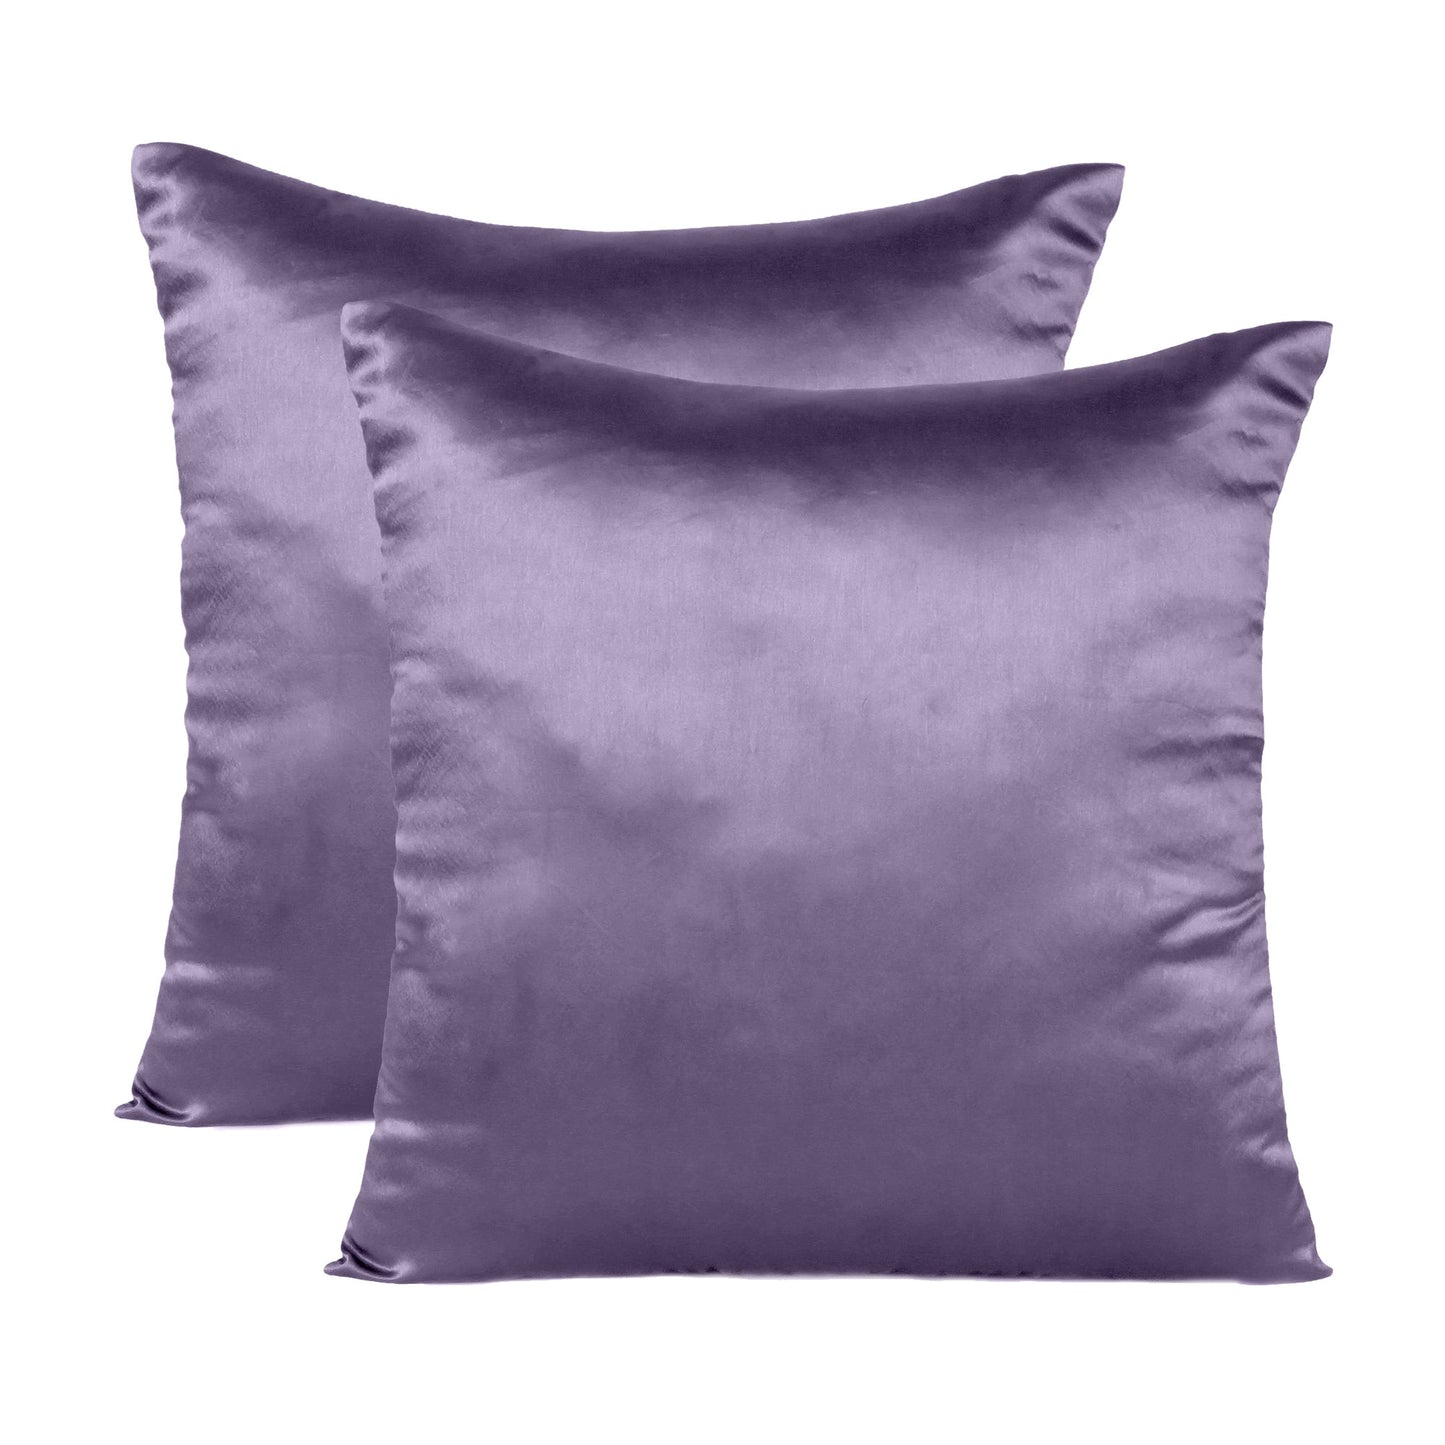 Bordeaux Purple Satin Silky Cushion Covers in Set of 2